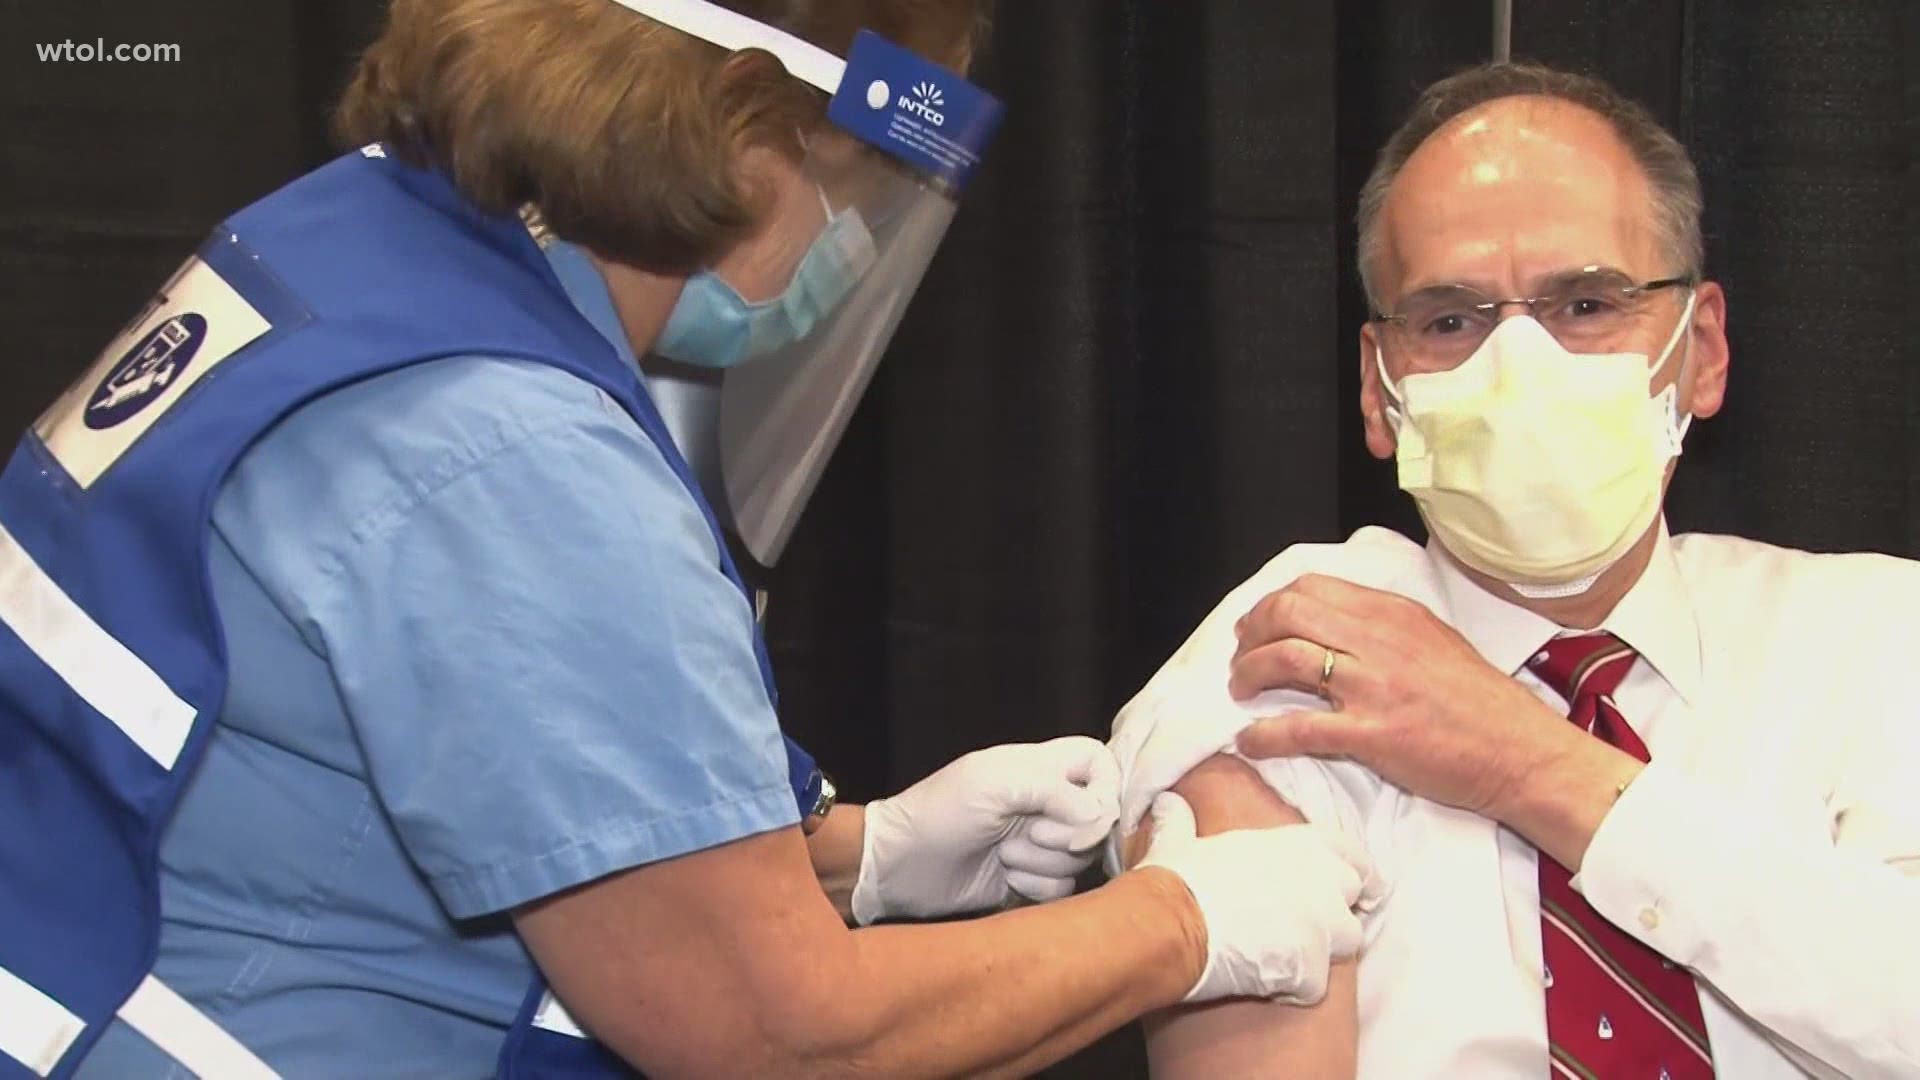 Among the first individuals to be vaccinated in Toledo were doctors, nurses and respiratory therapists.